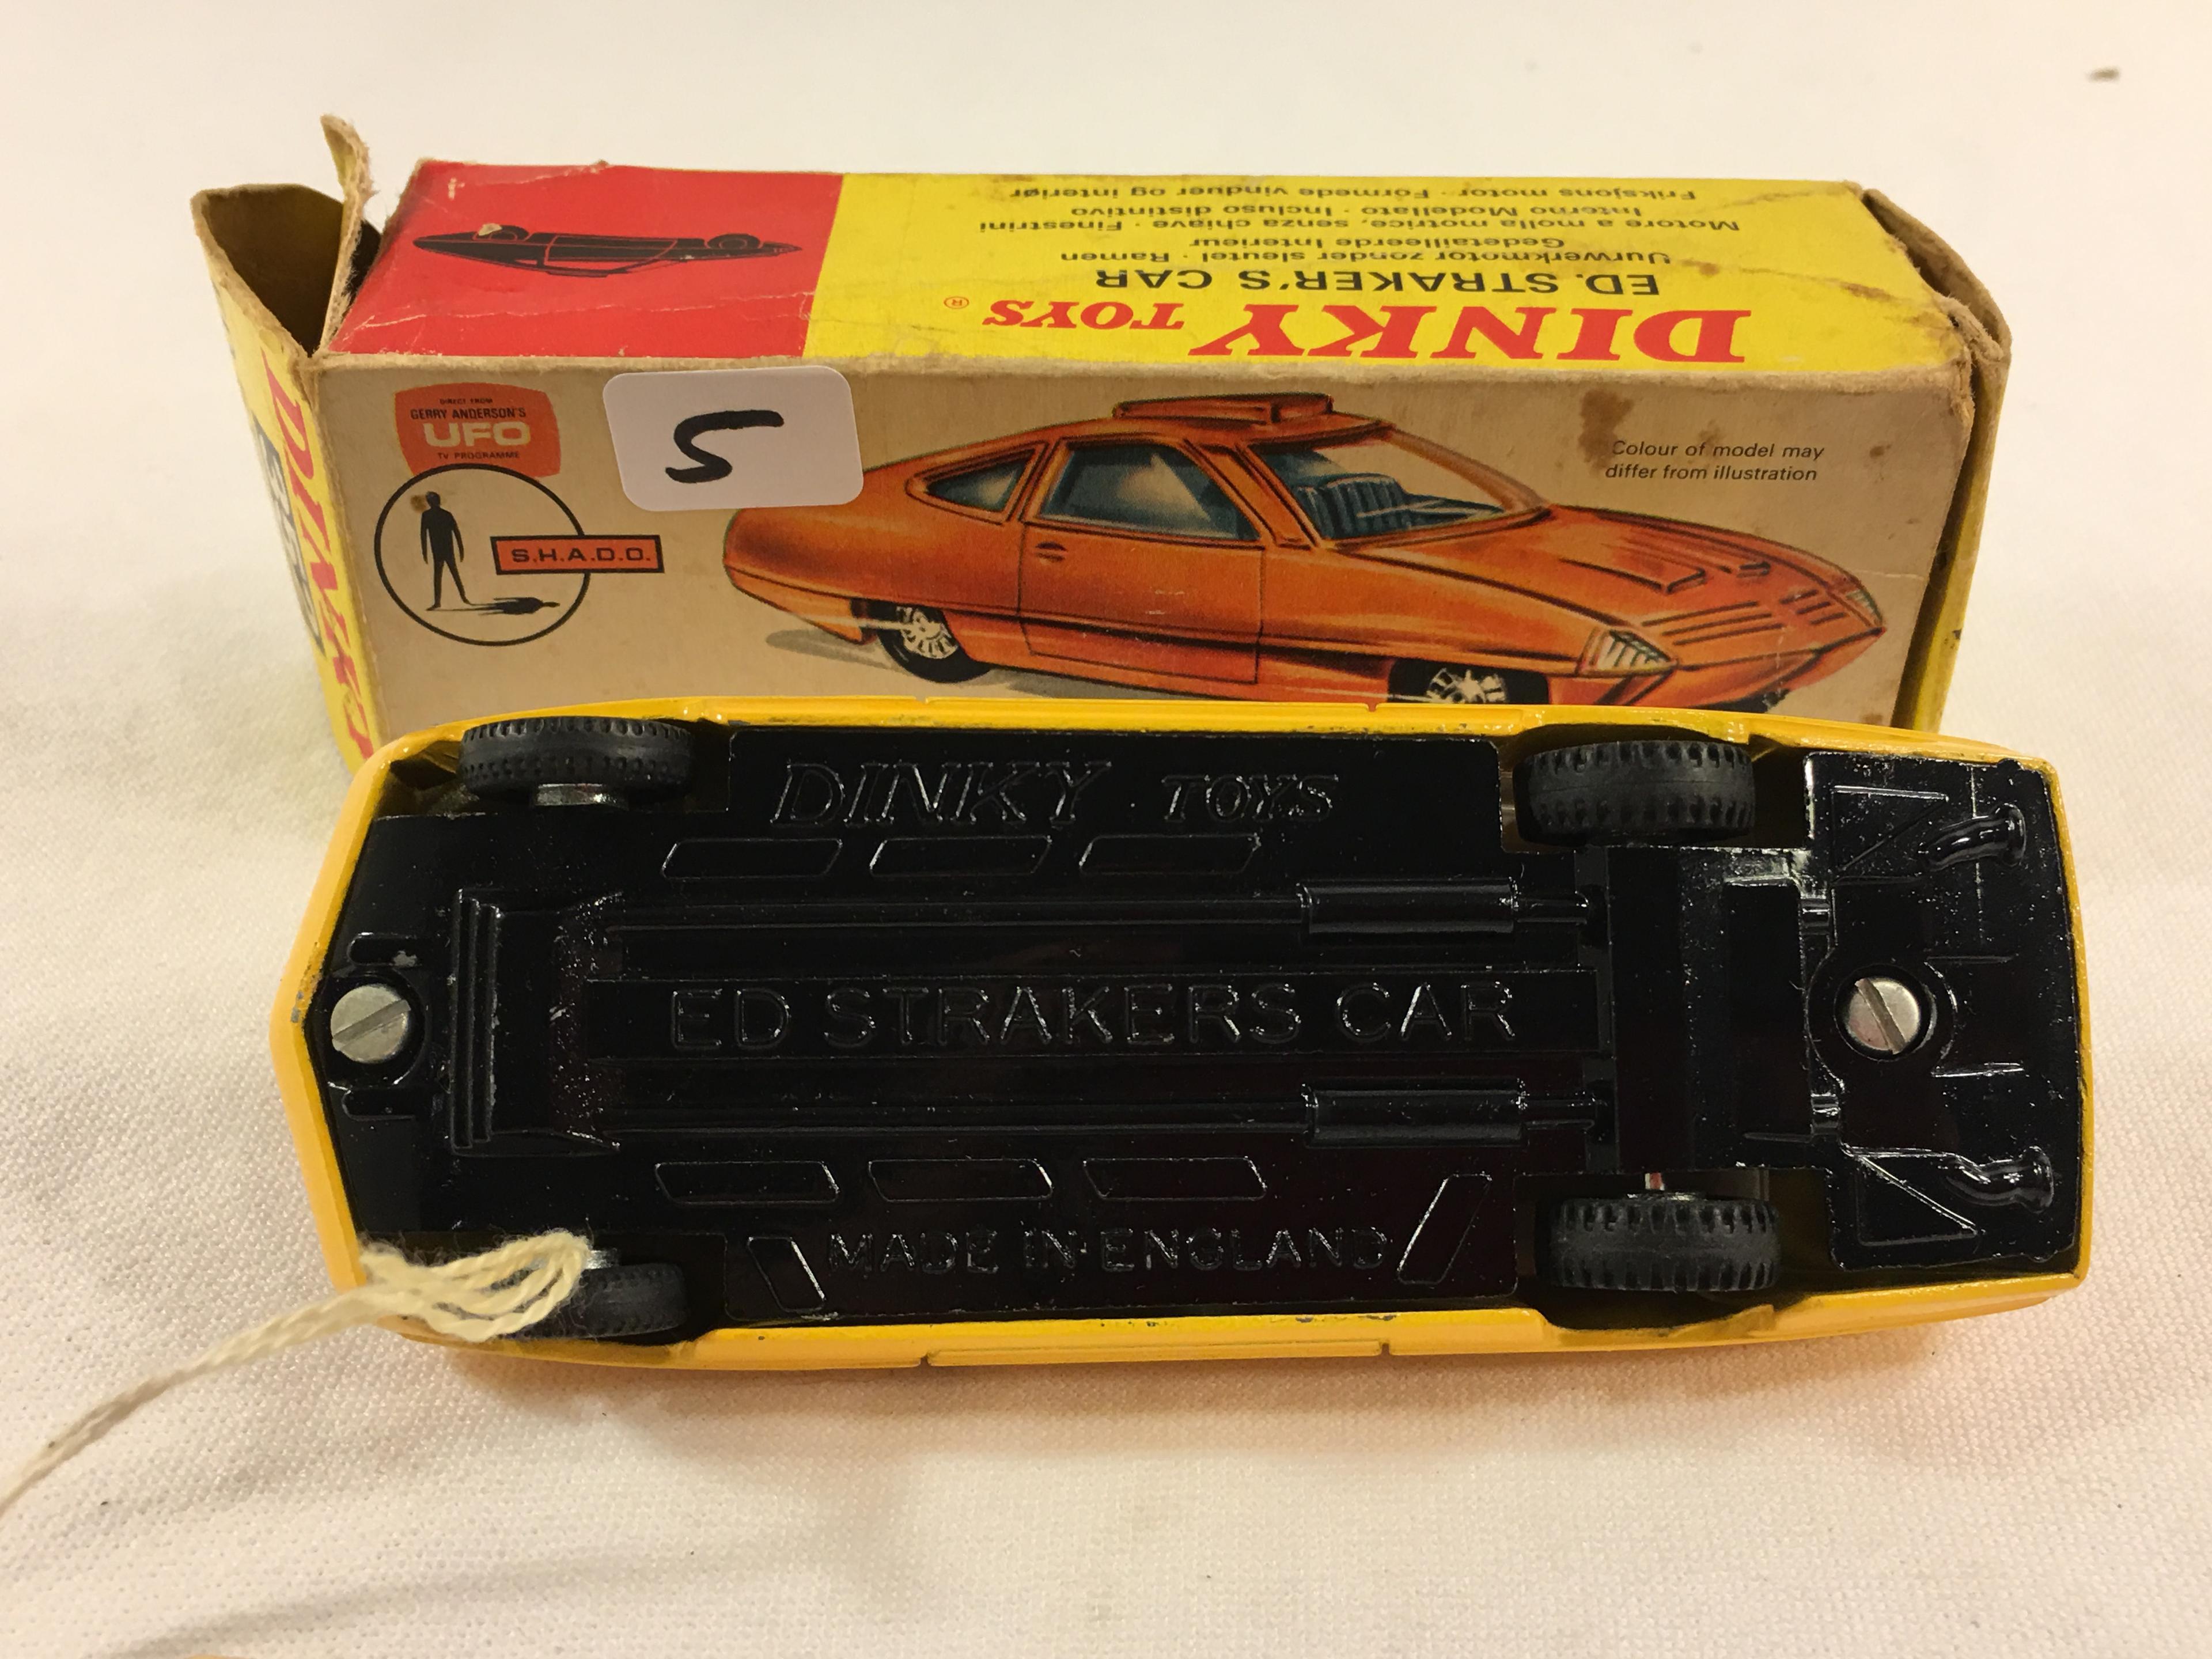 Collector Vintage Dinky Toys No.352 ED. Straker's Car  Made in England with Origina box